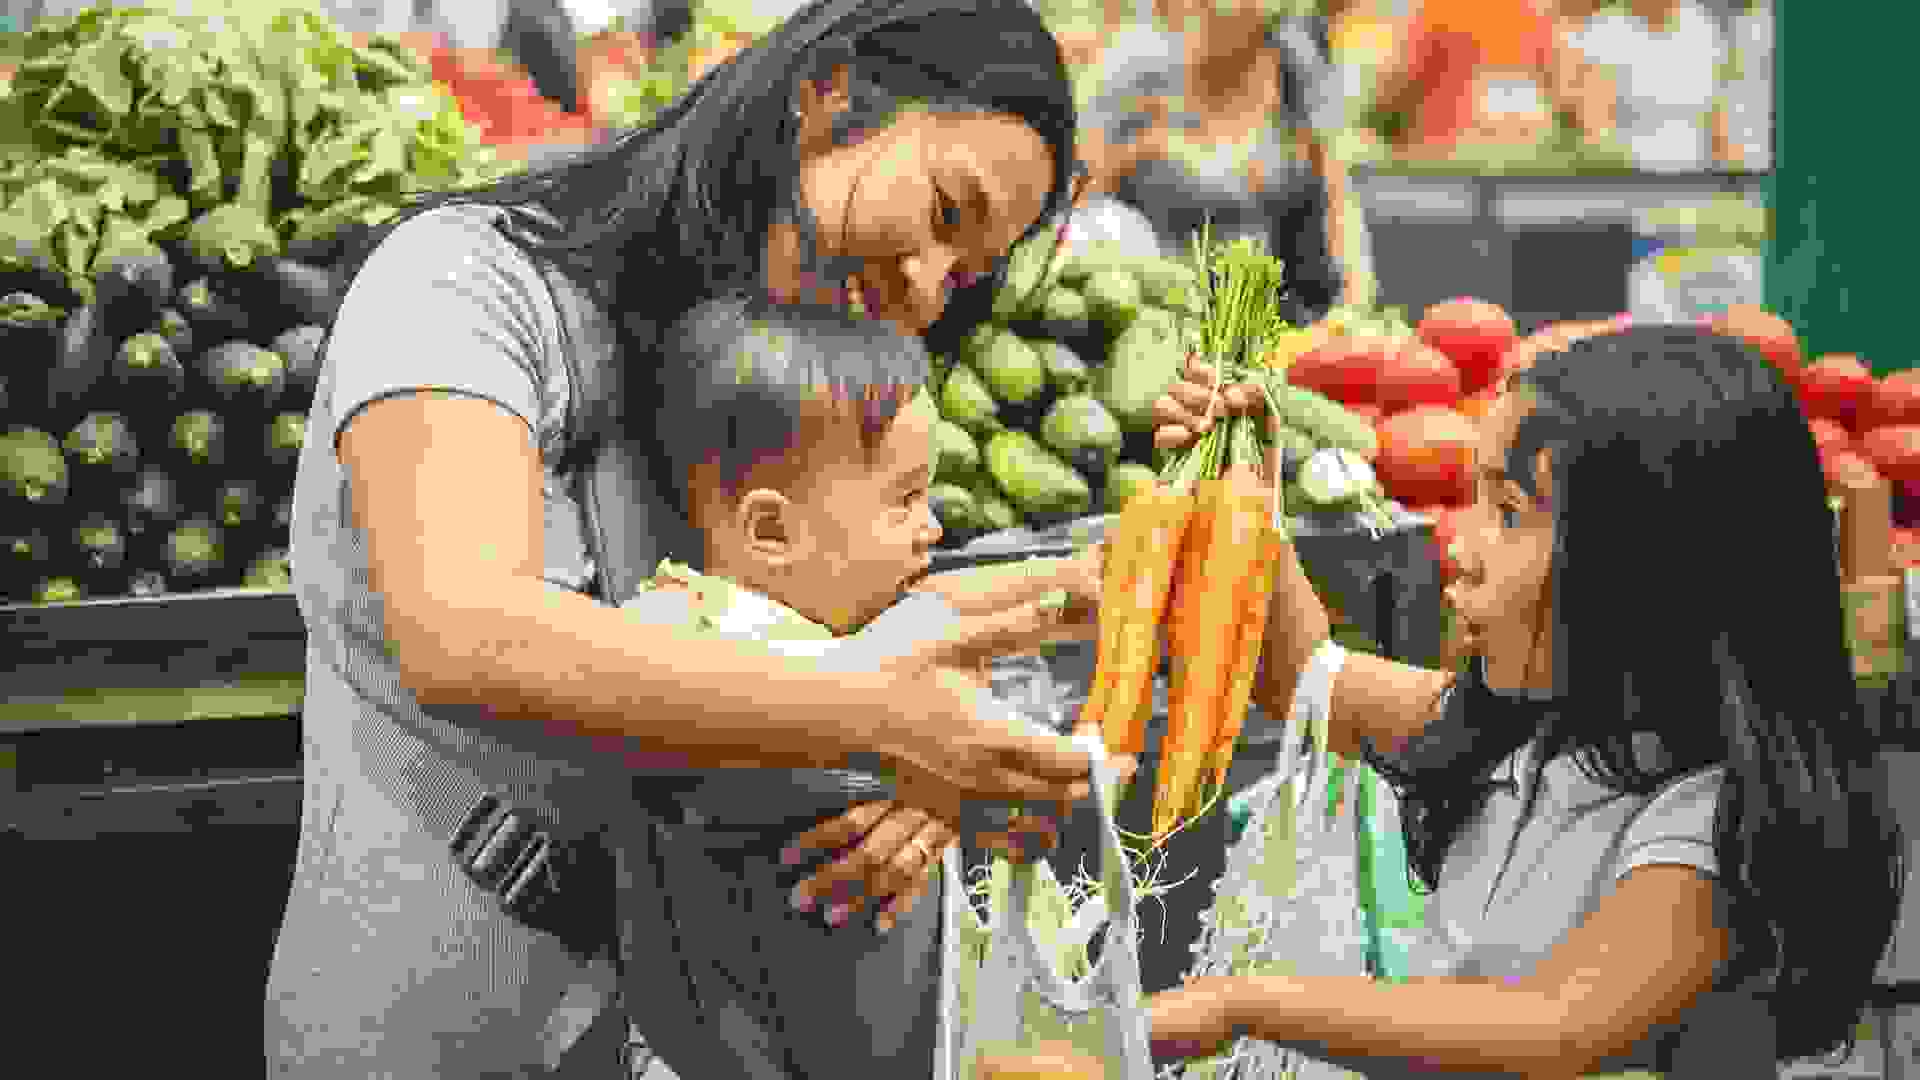 Mother with kids shopping in market stock photo